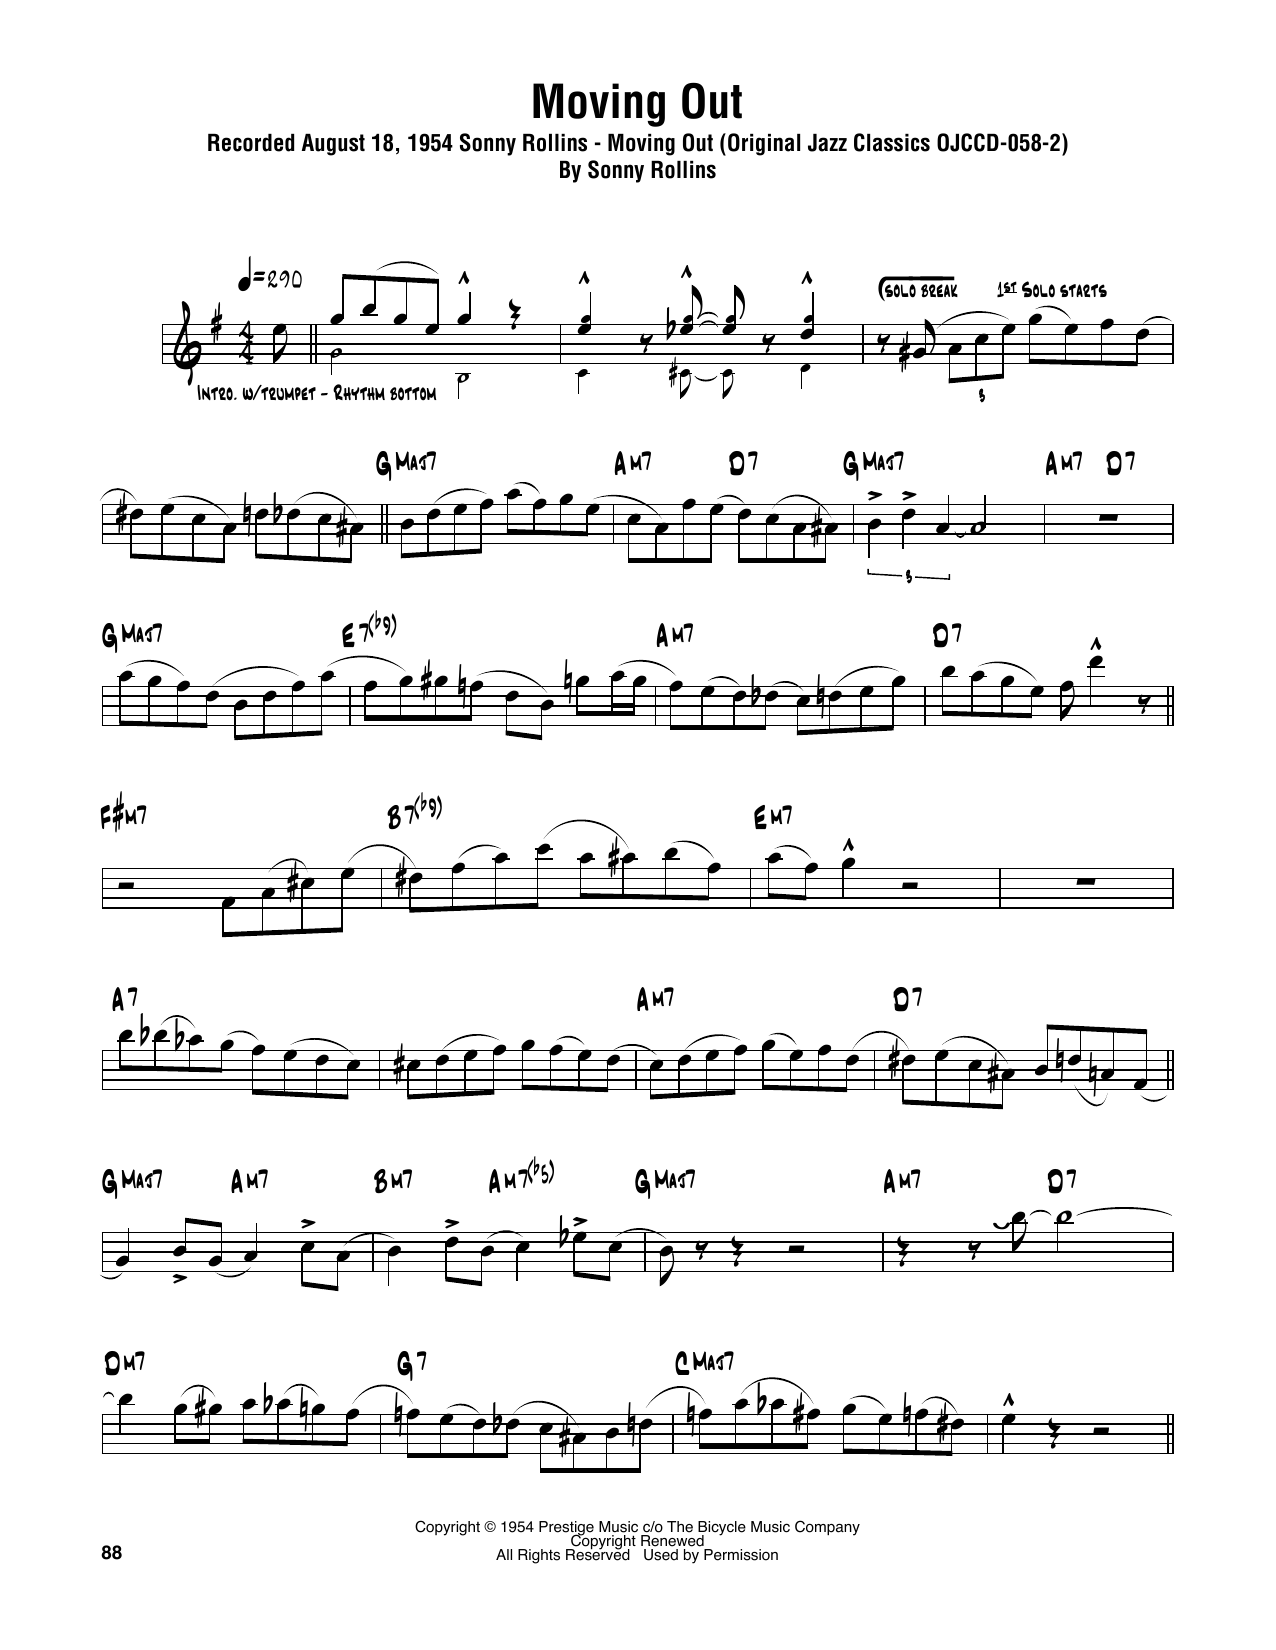 Download Sonny Rollins Moving Out Sheet Music